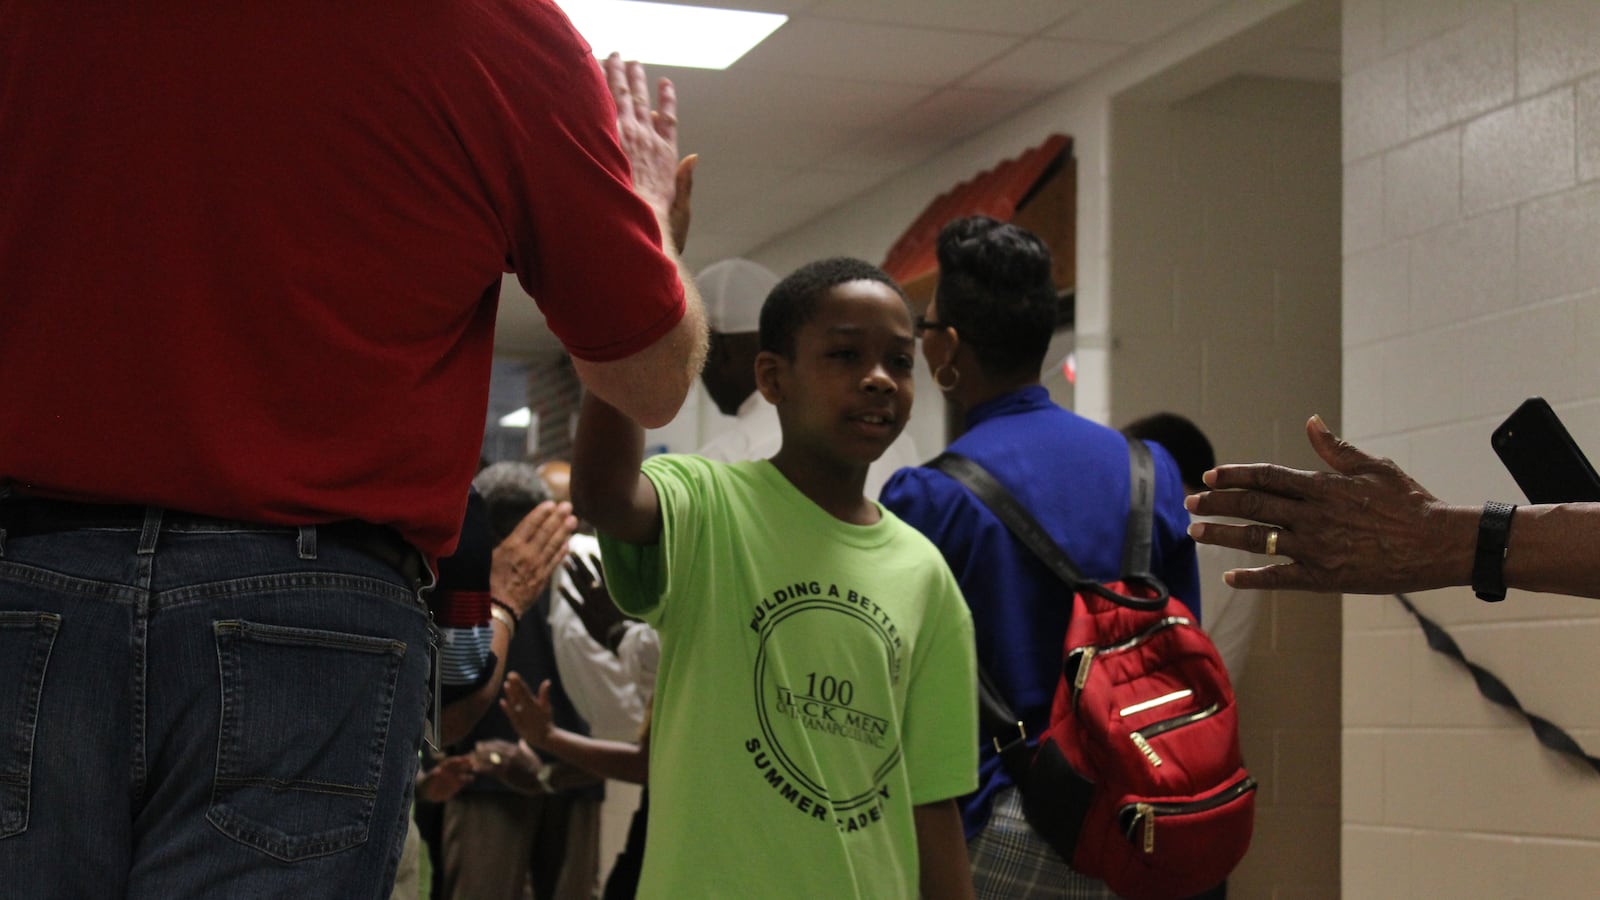 Community members and organizers with the 100 Black Men of Indianapolis' Summer Academy welcome a student with a high-five rally.